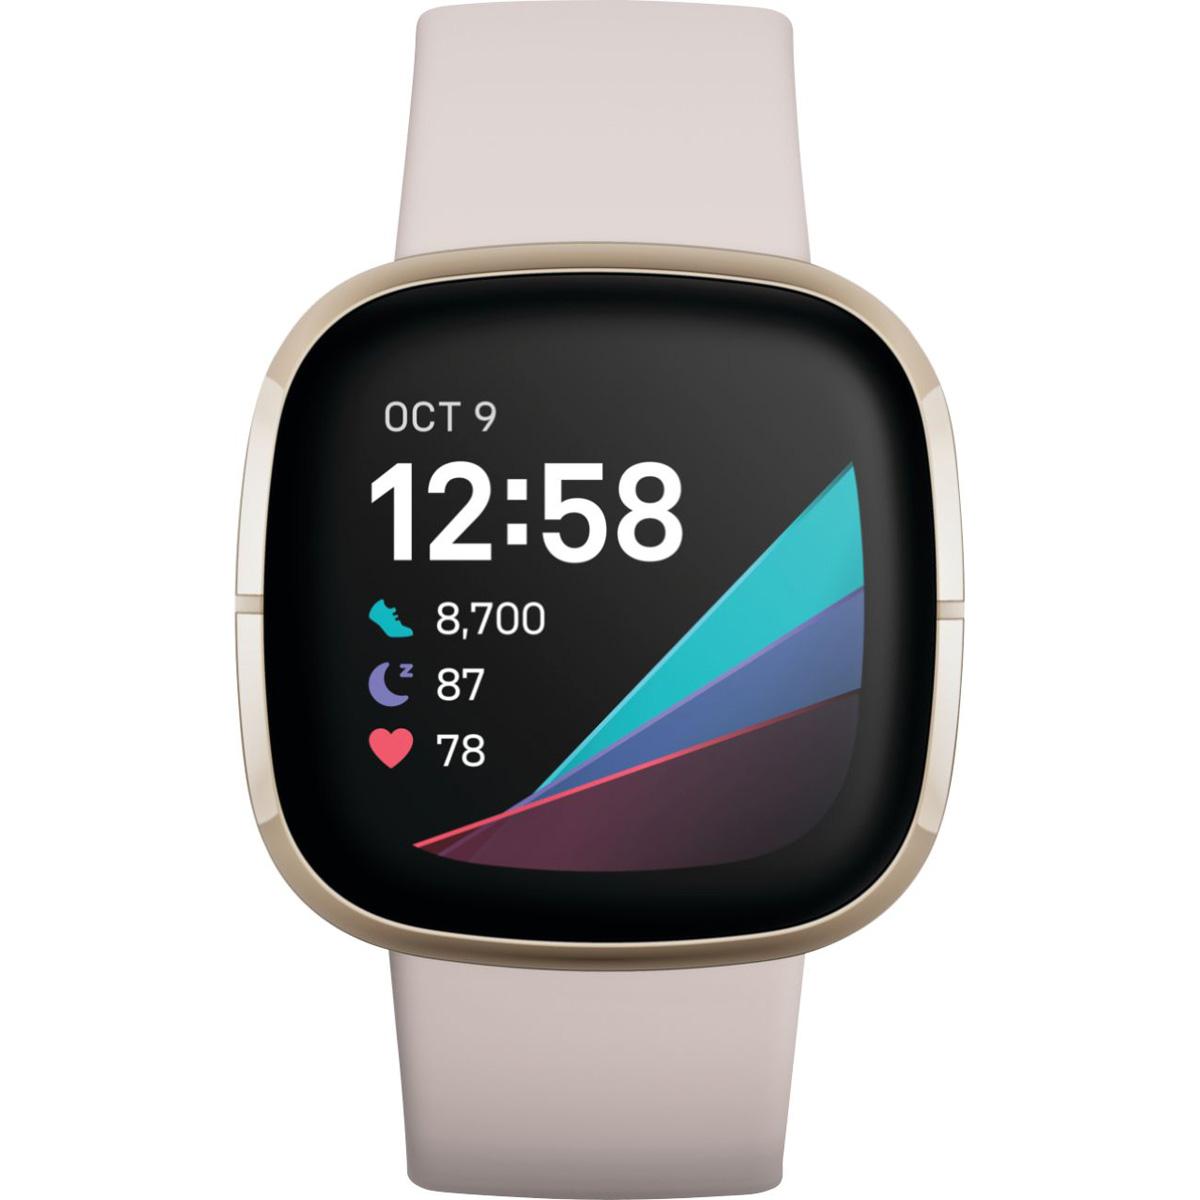 Fitbit Sense Advanced Health and Fitness Smartwatch for $259.95 Shipped